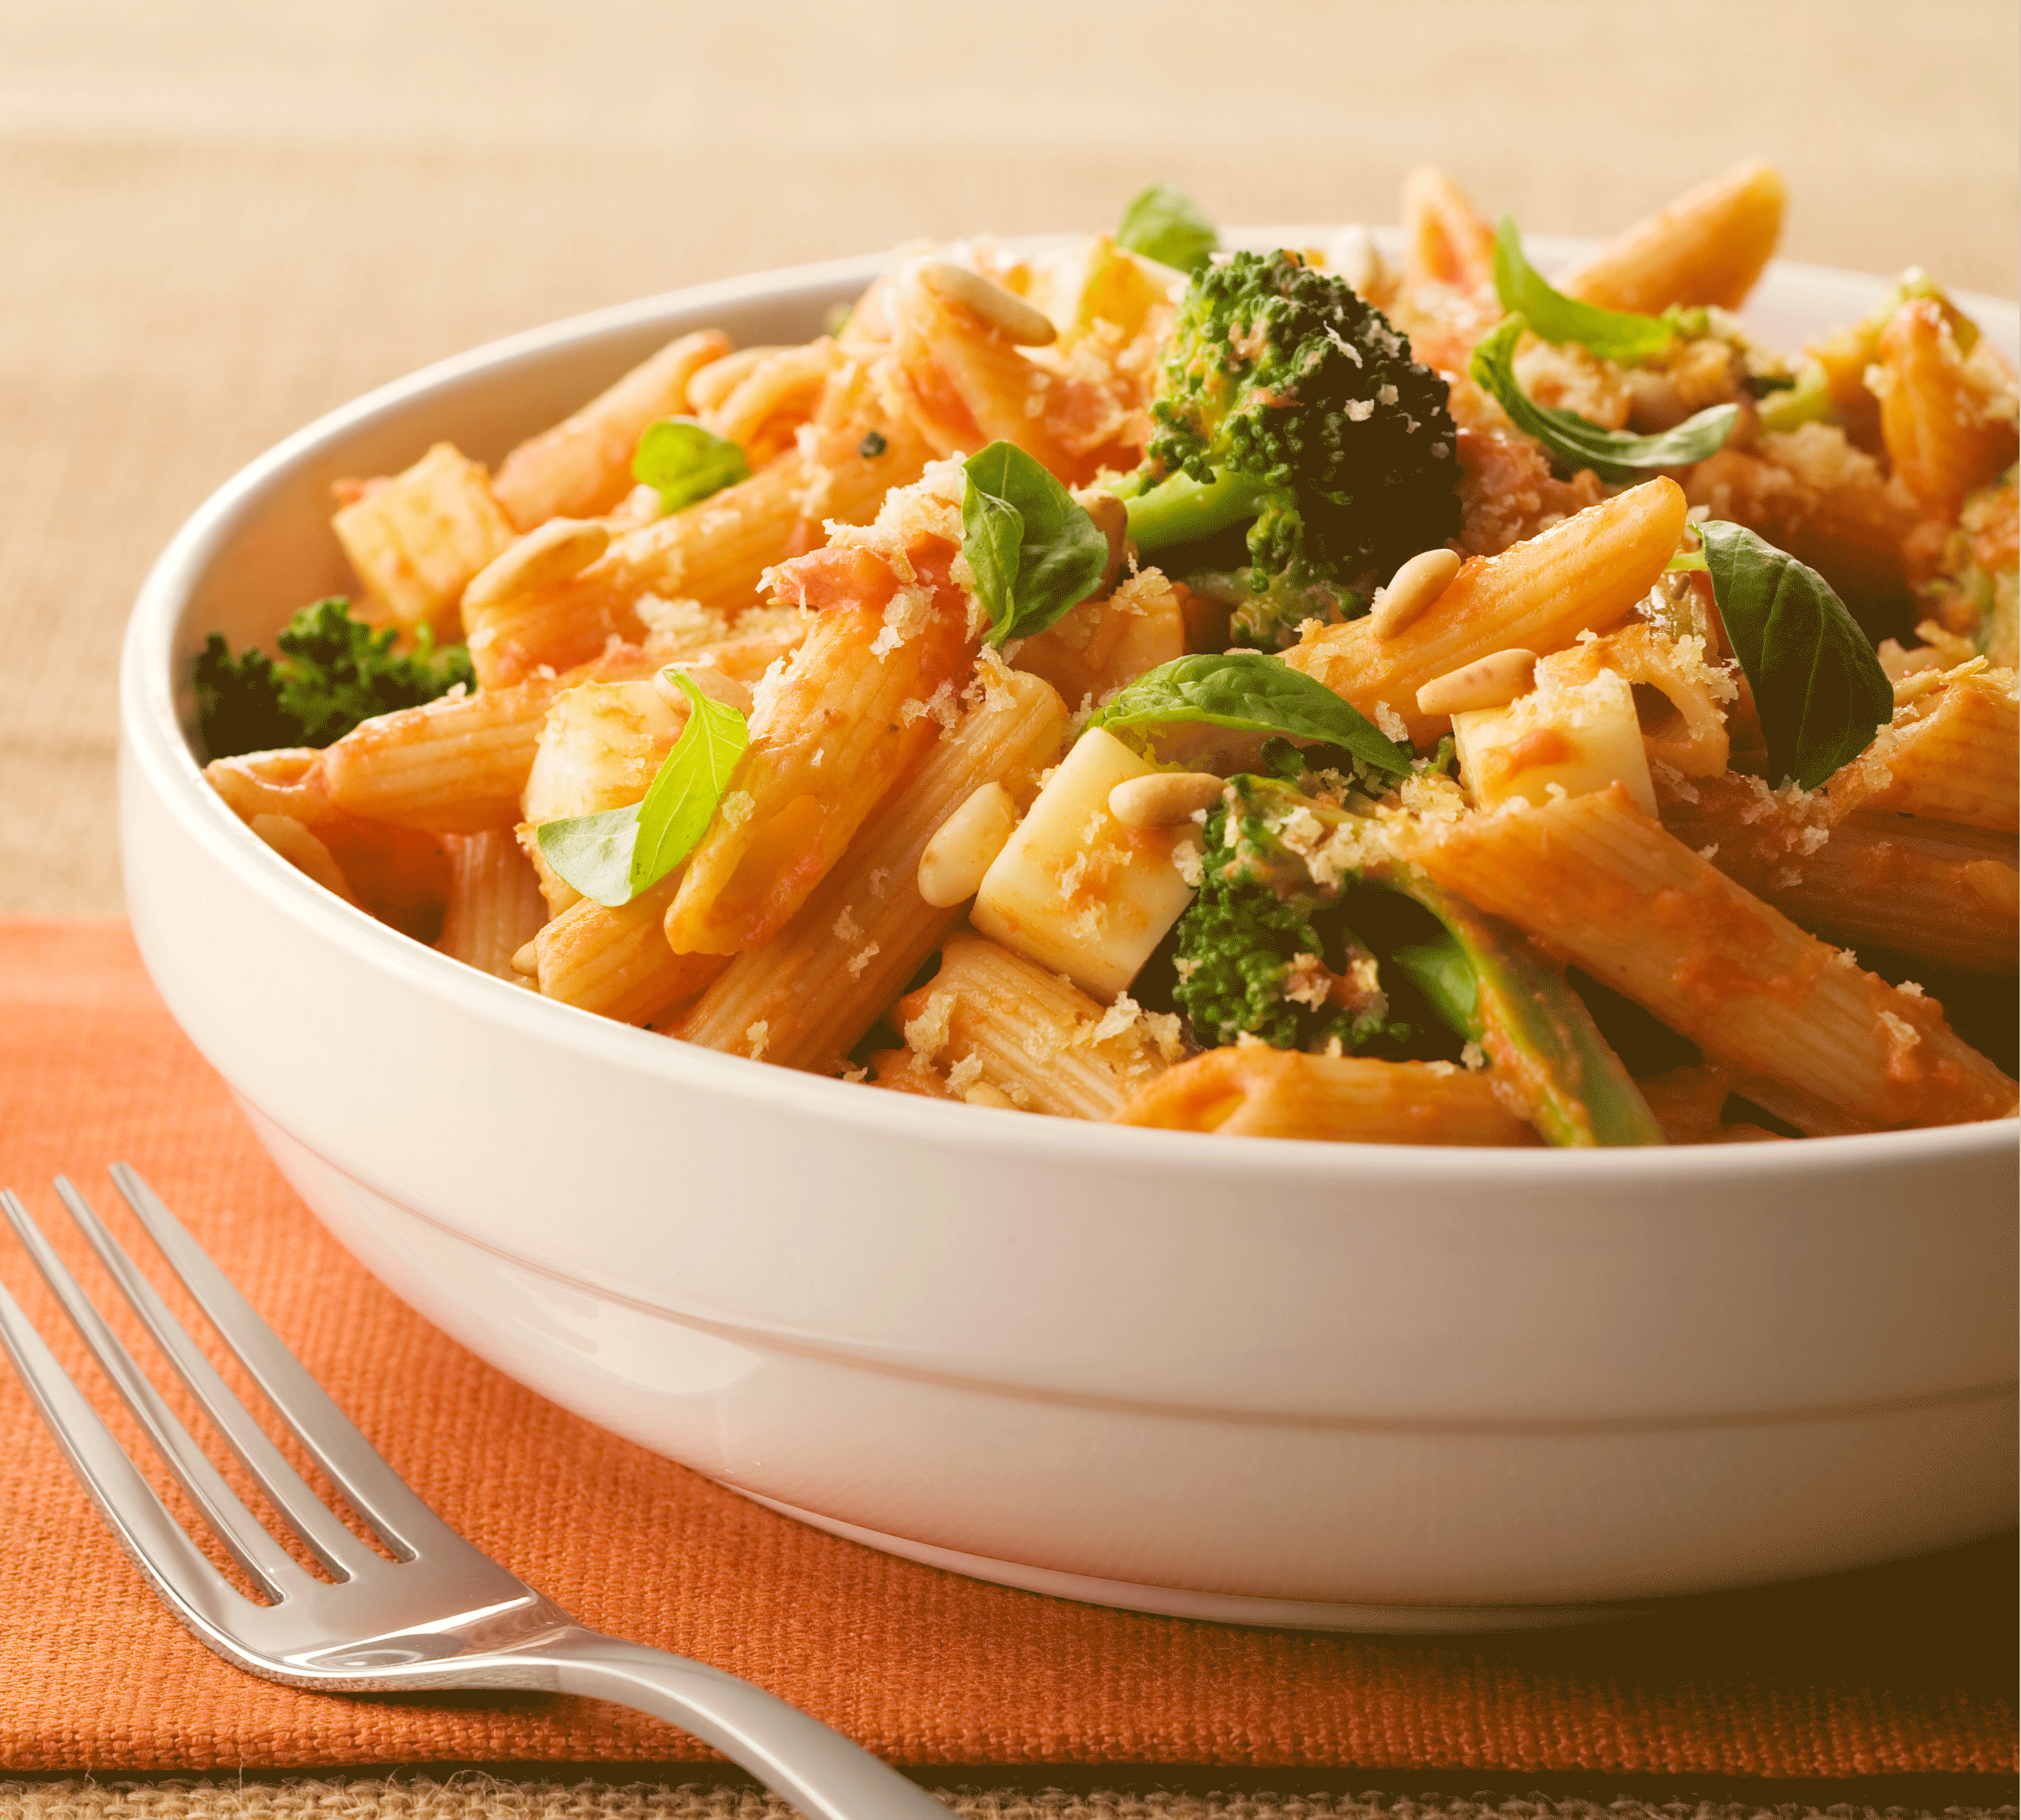 Penne Vodka with Broccoli